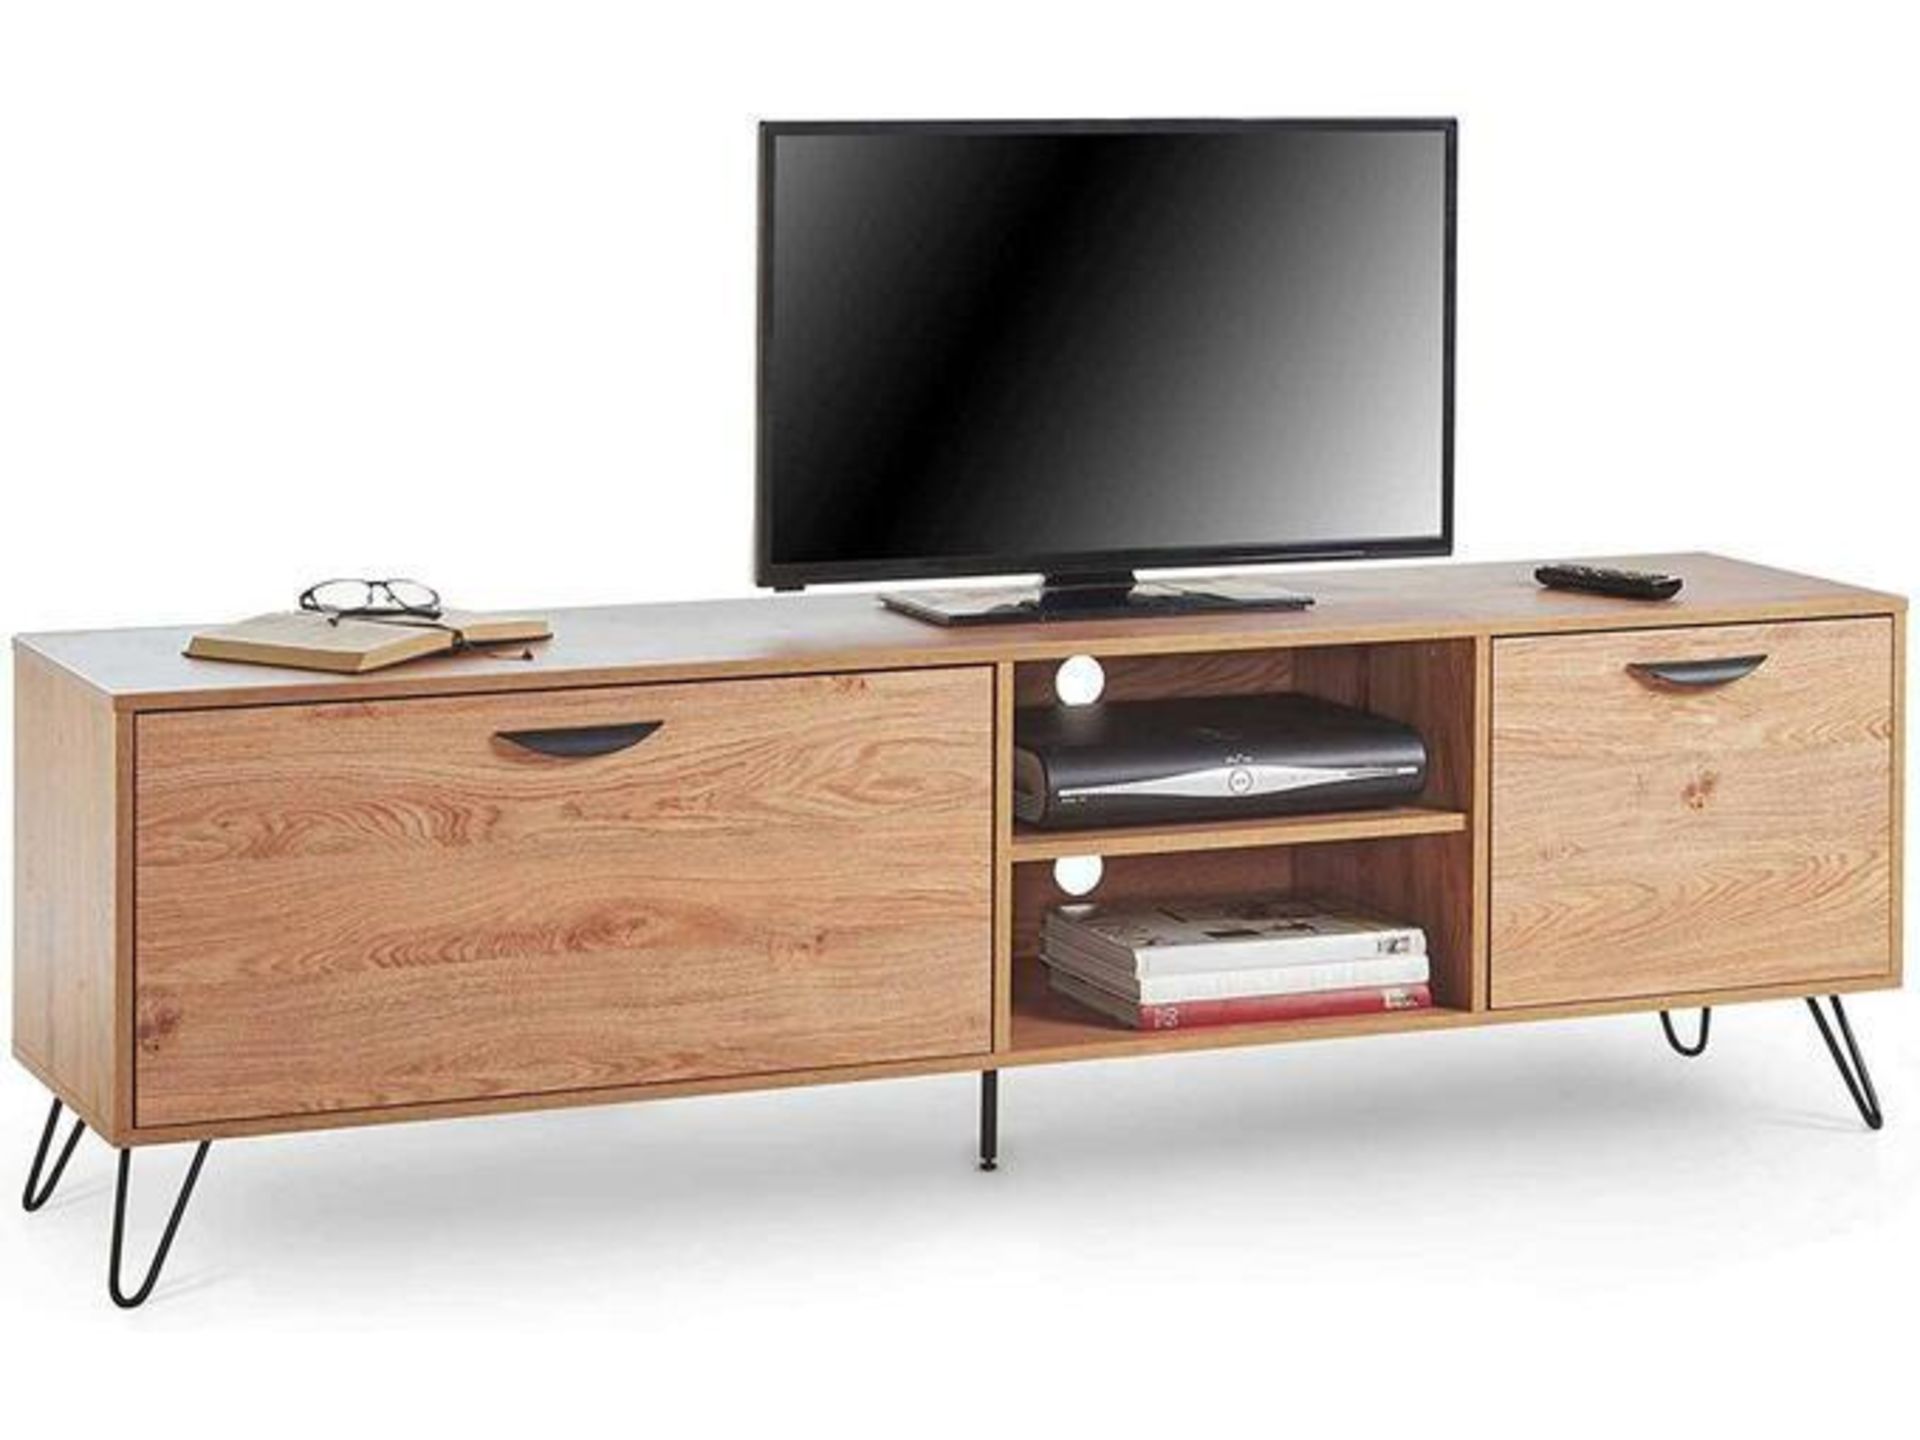 Capri Oak Effect Large TV Unit (ER34) Transform your room with a retro sideboard – perfect for